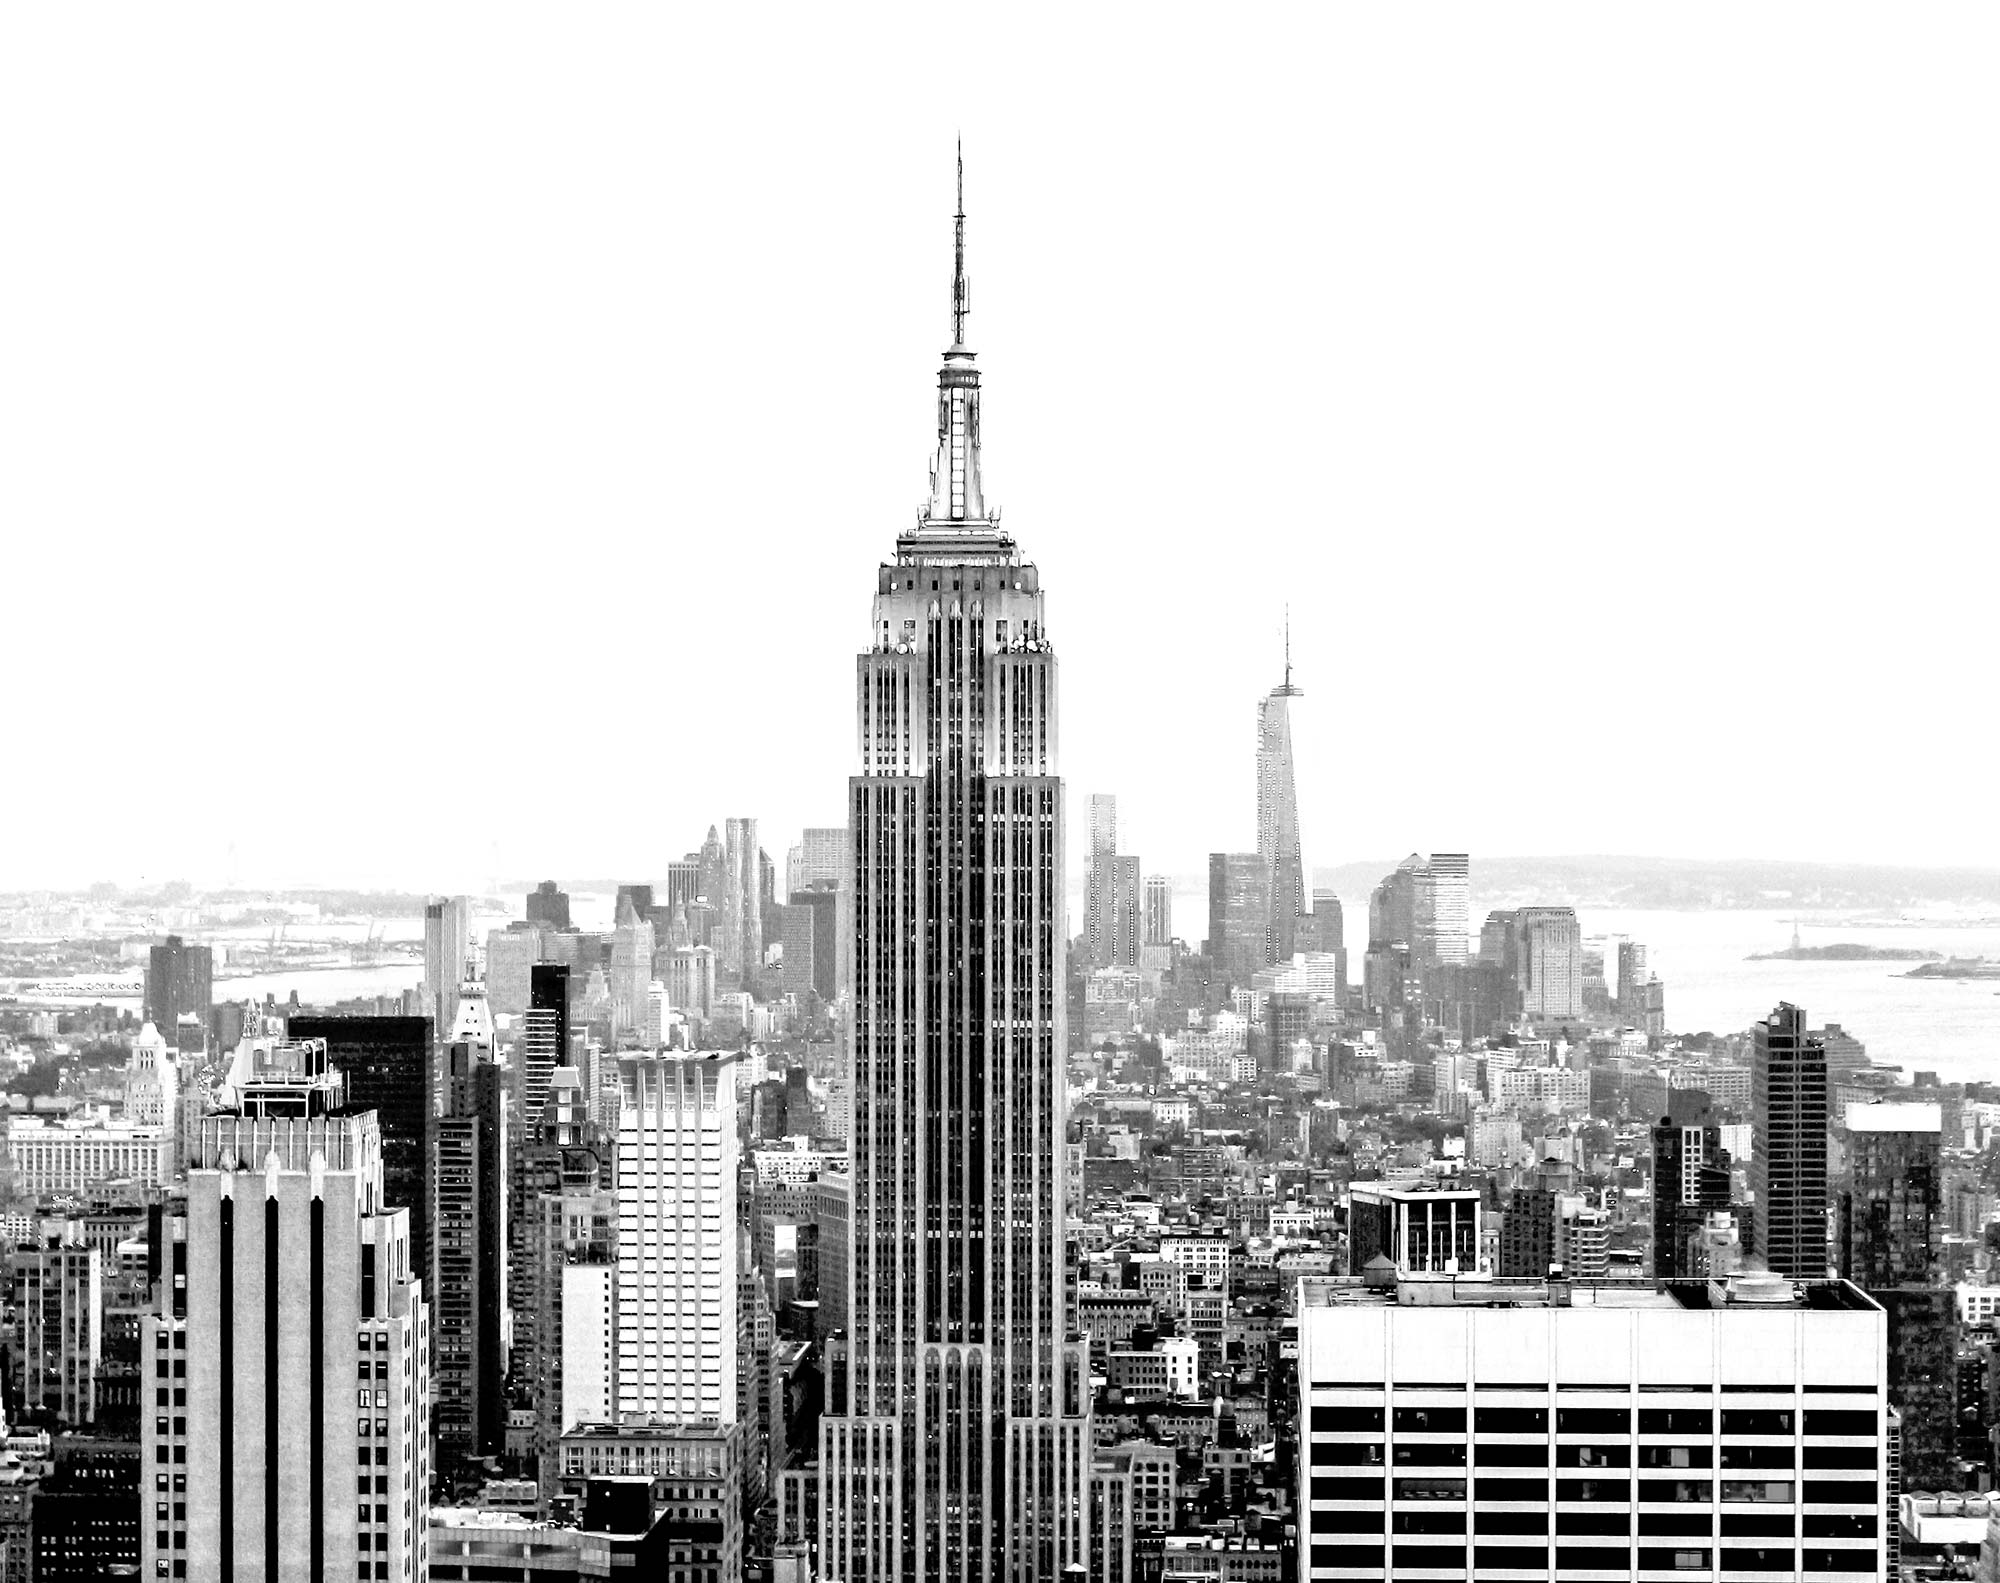 Skyline of Manhattan looking South with the Empire State Building prominently positioned in the foreground (black and white).